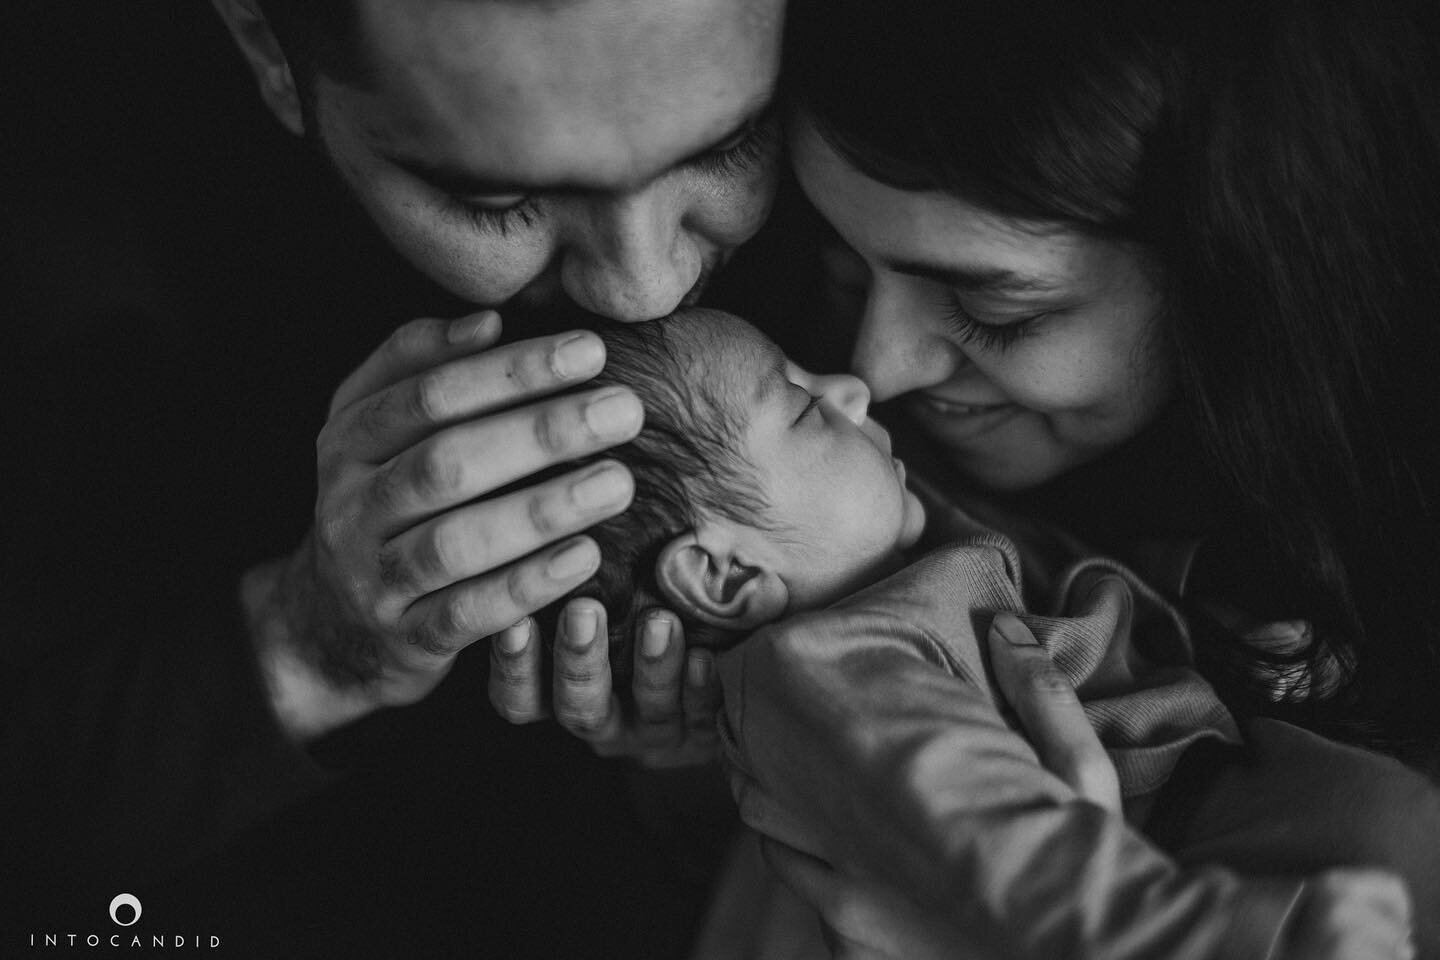 Introducing Baby Kabir.

This newborn family session is up on our blog now. Link in profile.

#intocandidphotography #newbornfamilysession #newborn #newbornbaby #newbornphotography #familysession #mumbaifamilysessions #newbornphotographer #newbornpos